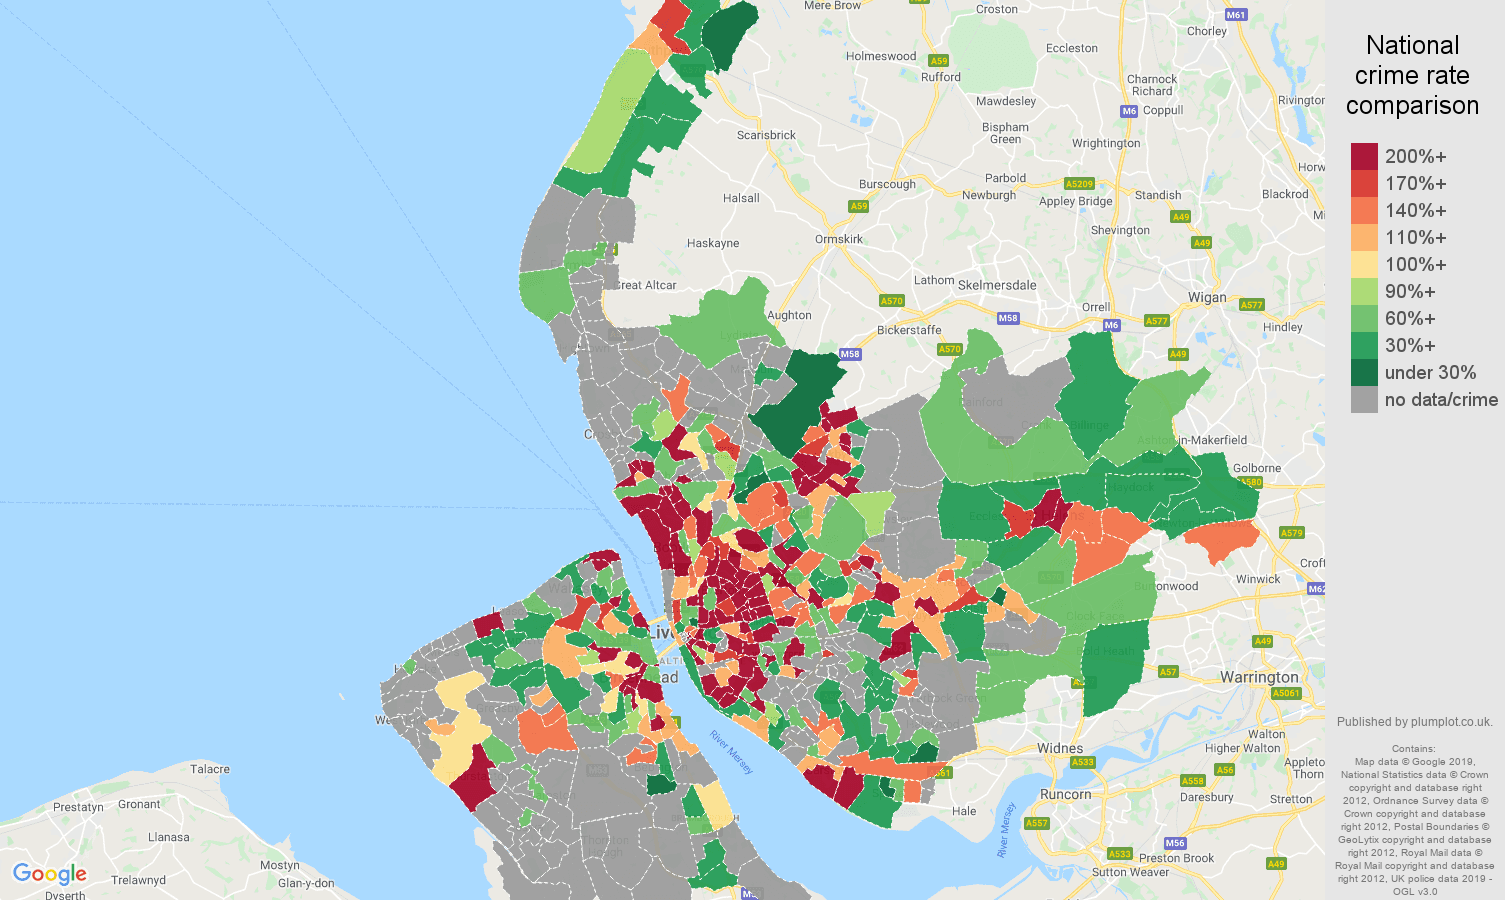 Merseyside possession of weapons crime rate comparison map